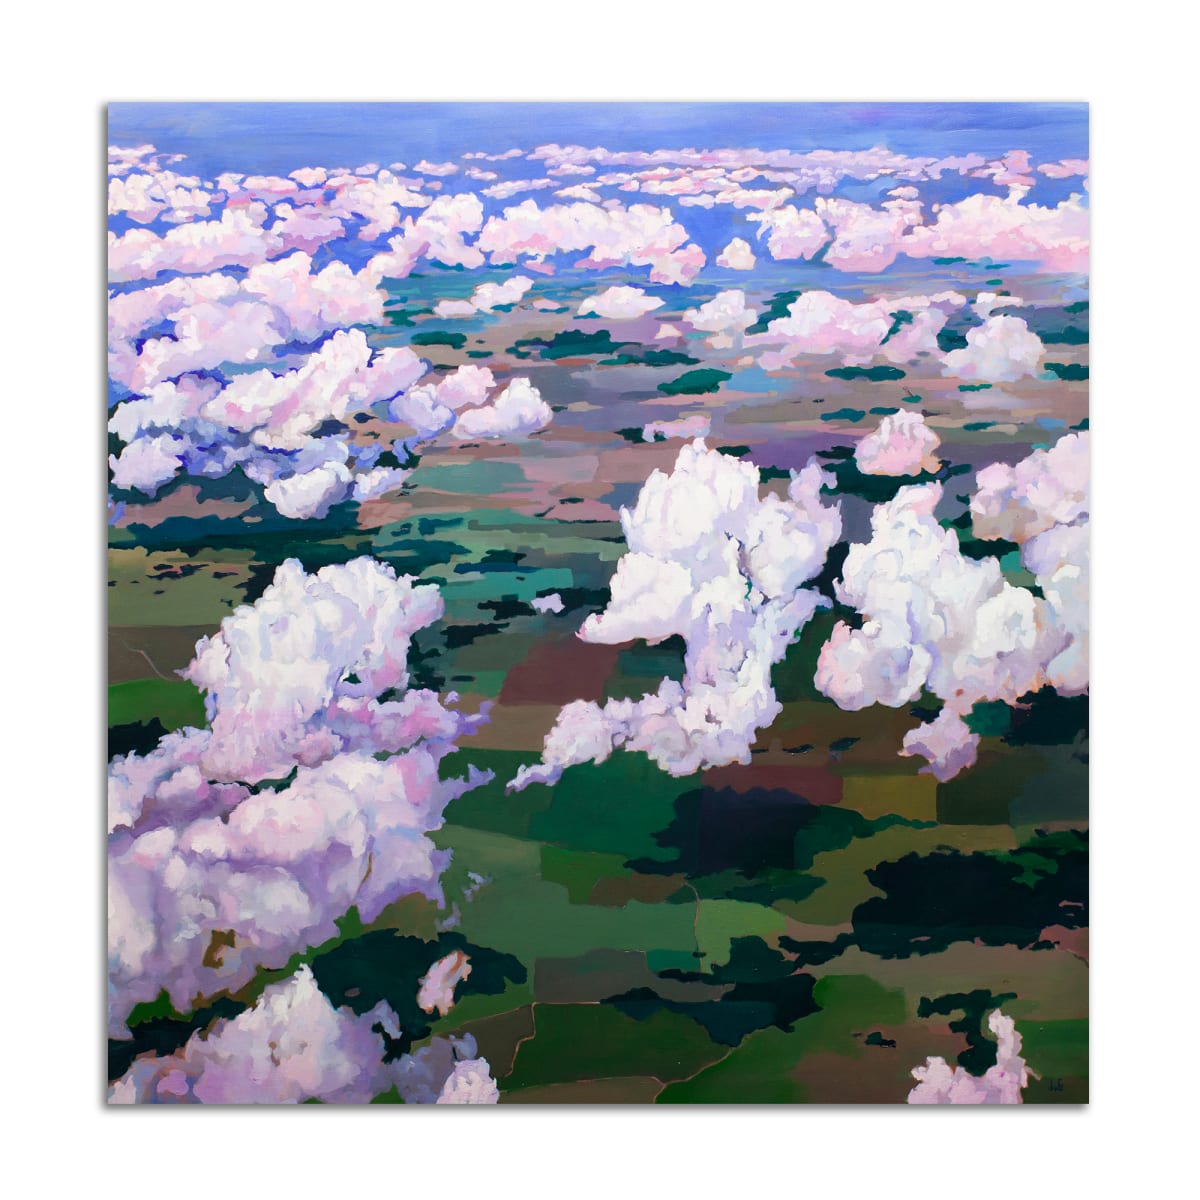 Clouds on the Horizon by Jared Gillett 